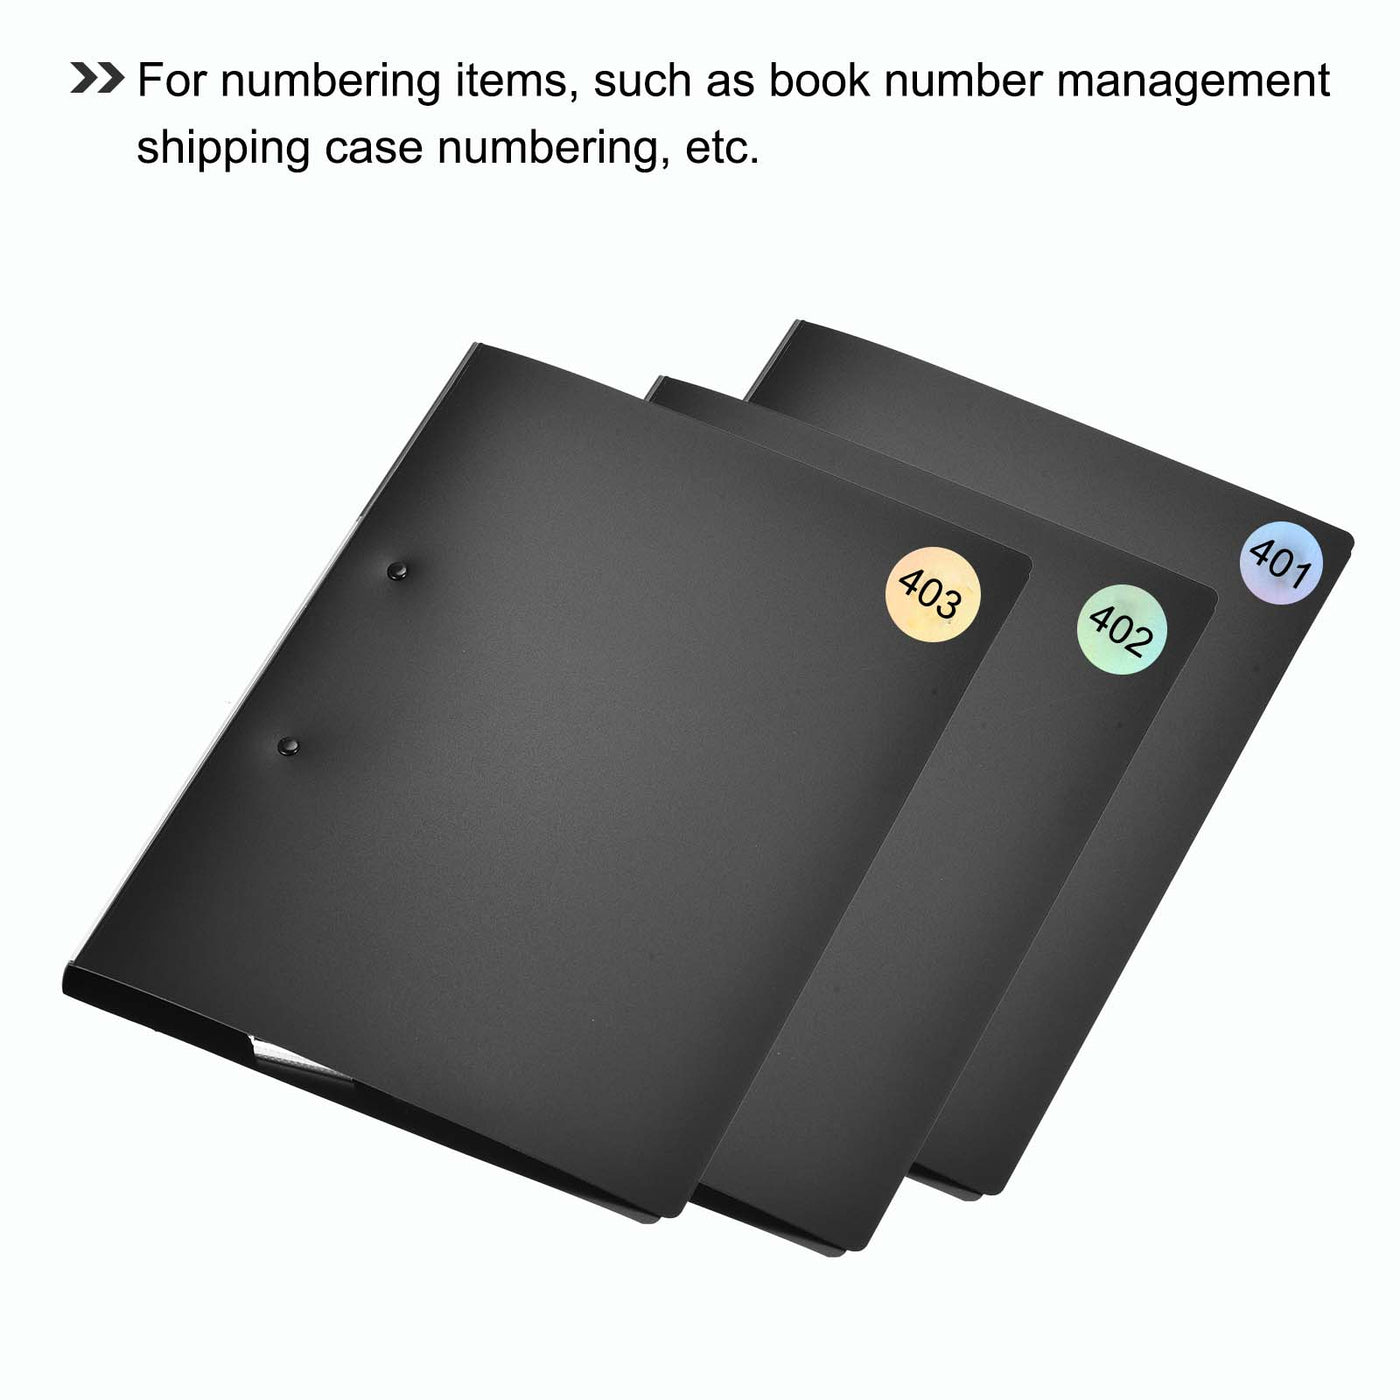 Harfington Laser Number Stickers, Number 401 to 500 Round Self Adhesive Reflective Sticker for Inventory, Storage Organizing, 10 Sheets(1000pcs)